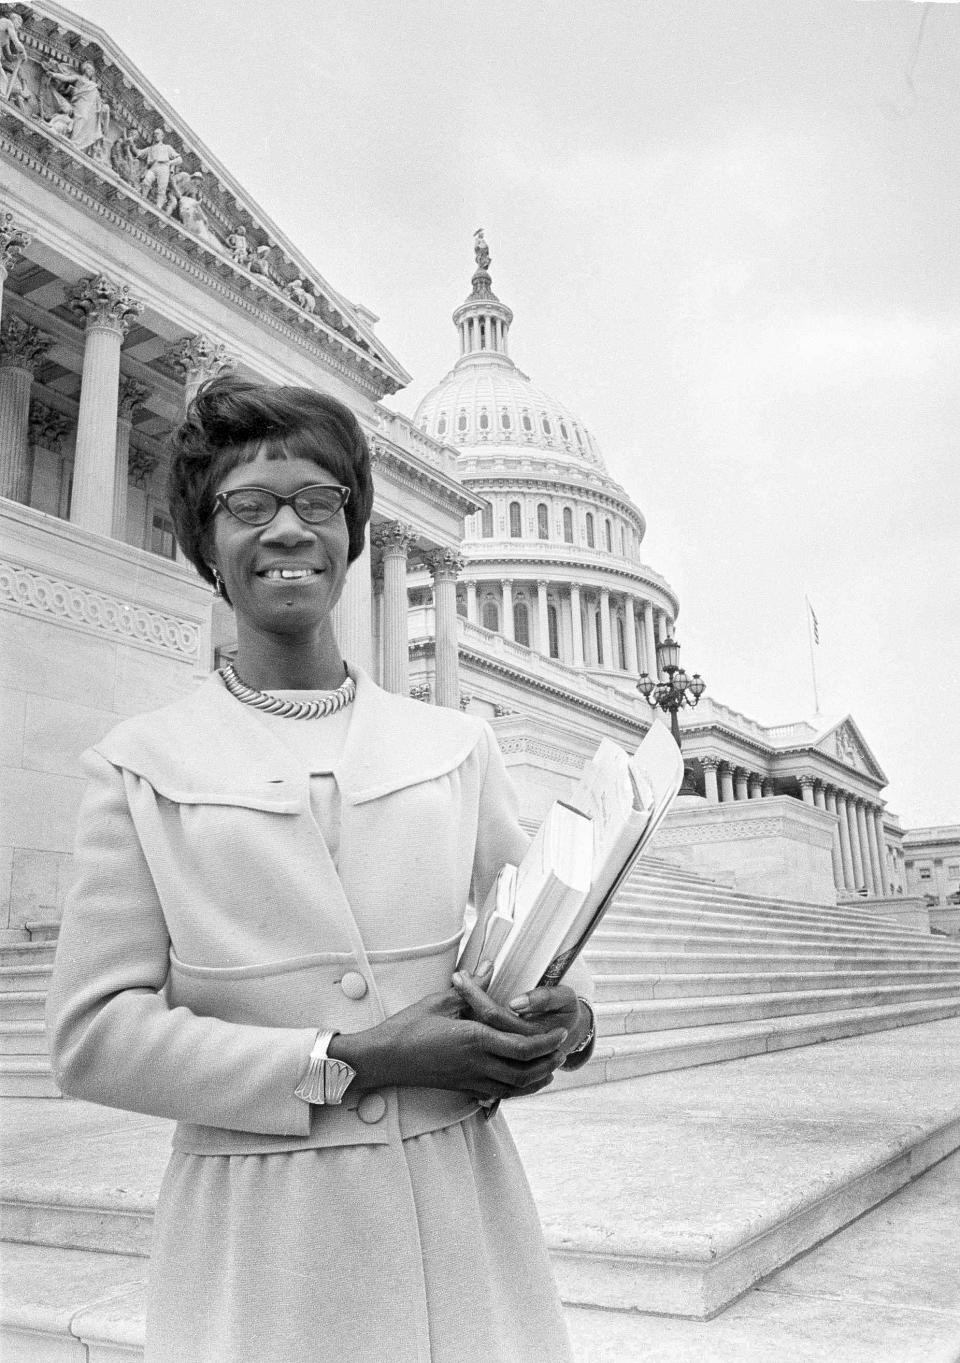 FILE - In this March 26, 1969, file photo, Rep. Shirley Chisholm, D-N.Y., poses on the steps of the Capitol in Washington with material she plans to use in a speech before the House of Representatives. Fifty years have passed since the Brooklyn, N.Y. native made history on Nov. 5, 1968, as the first African-American woman elected to Congress. (AP Photo/Charles Gorry, File)